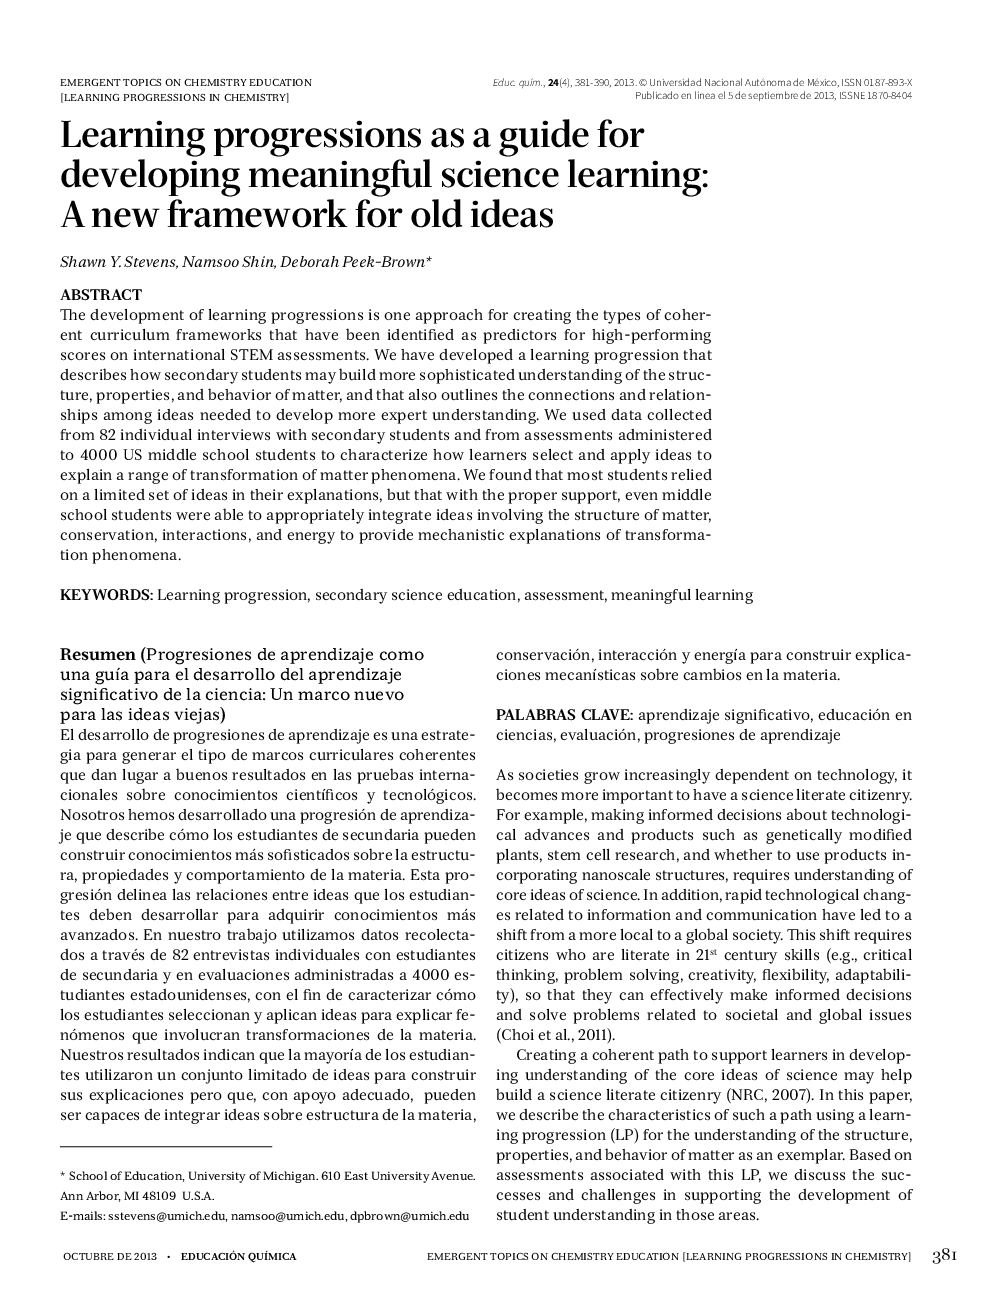 Learning progressions as a guide for developing meaningful science learning: A new framework for old ideas